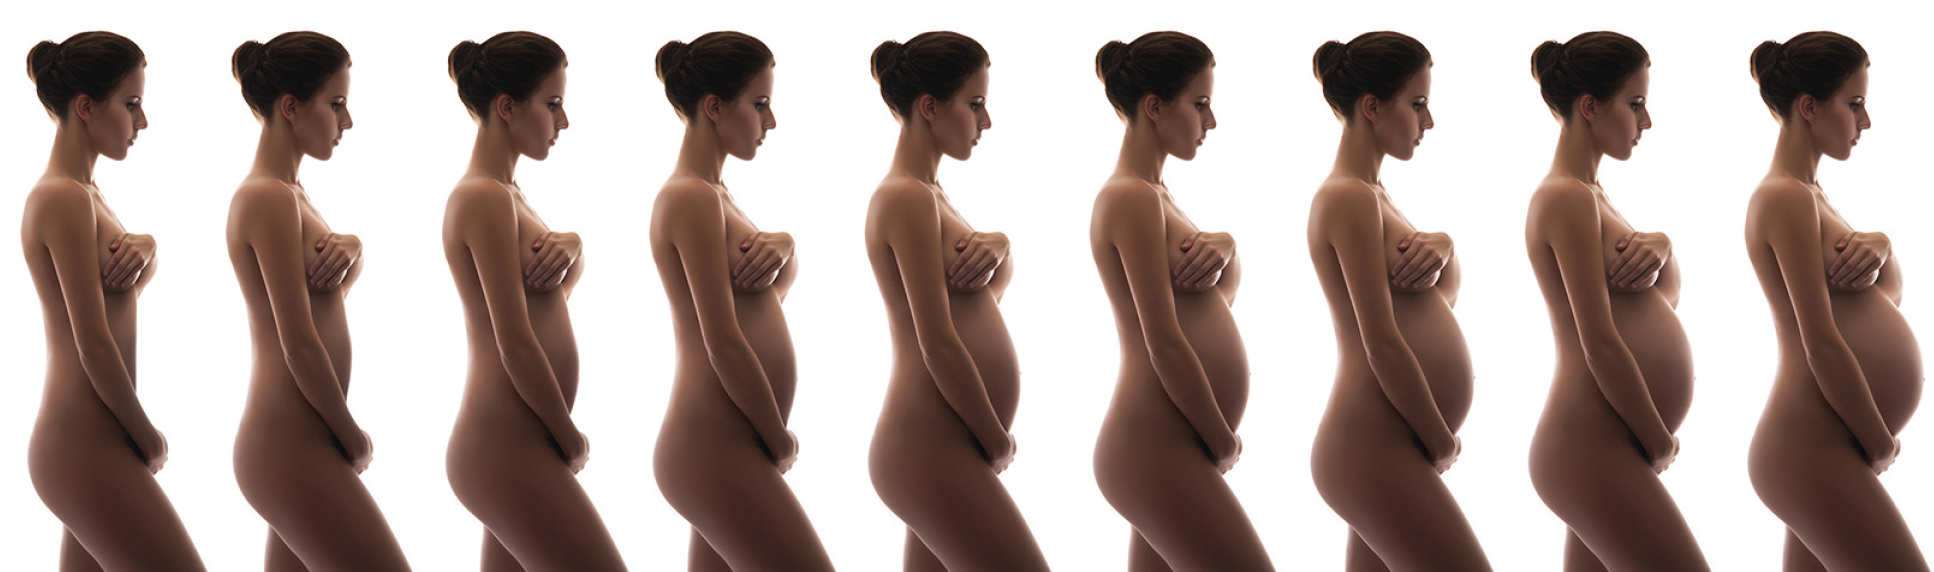 Women in different stages of pregnancy 